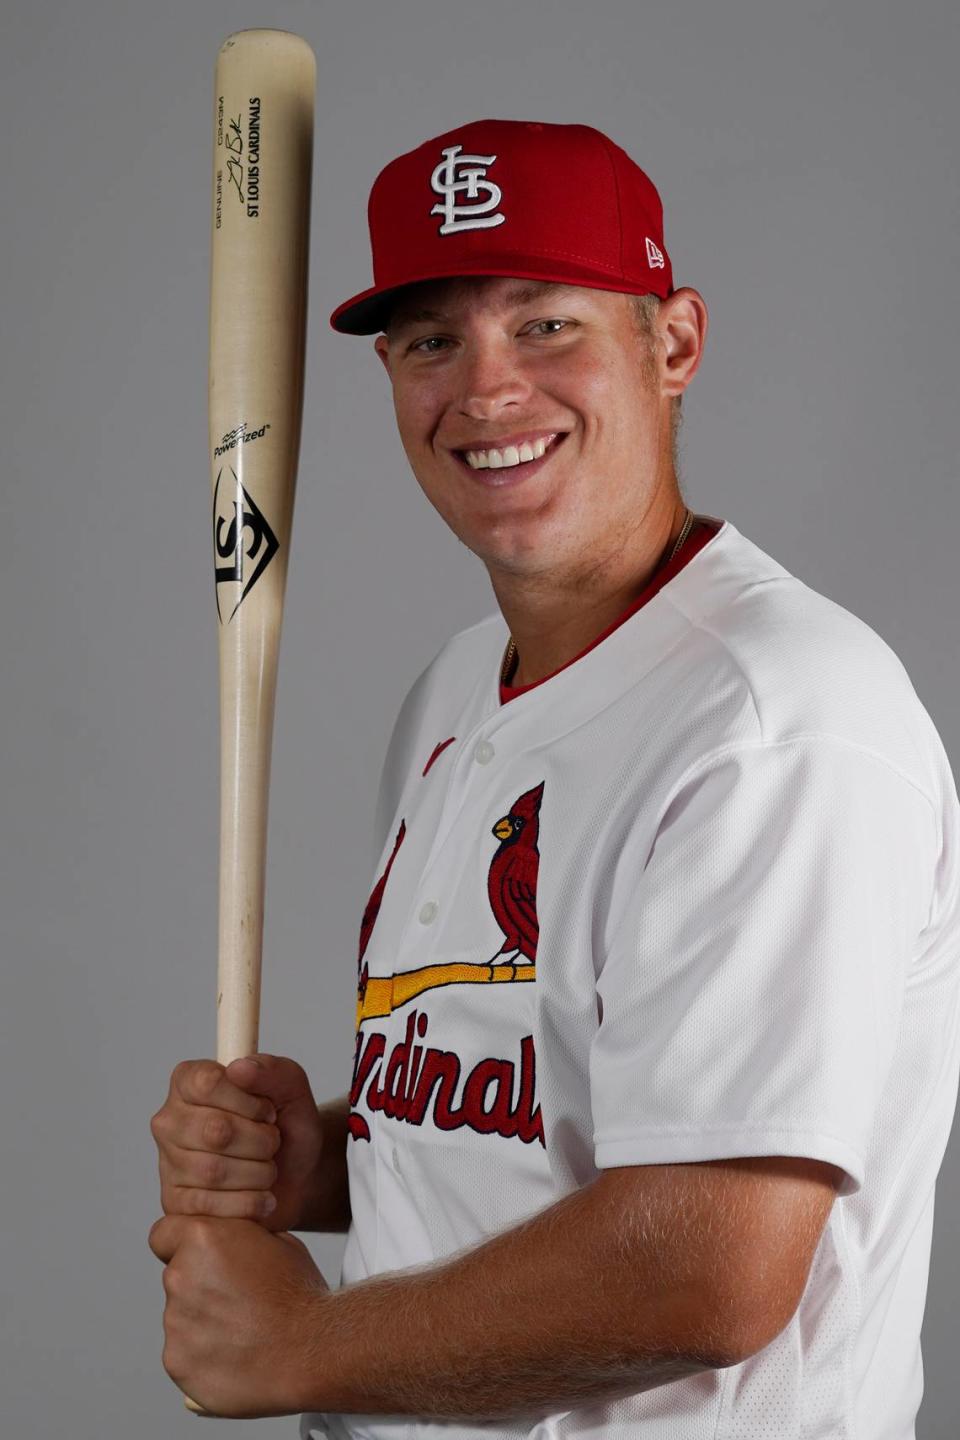 St. Louis Cardinals first base prospect Luken Baker is having a big season for the Memphis Redbirds, the organization’s Triple-A affiliate. The Texas Christian University product now hopes to make the jump to the major league club.